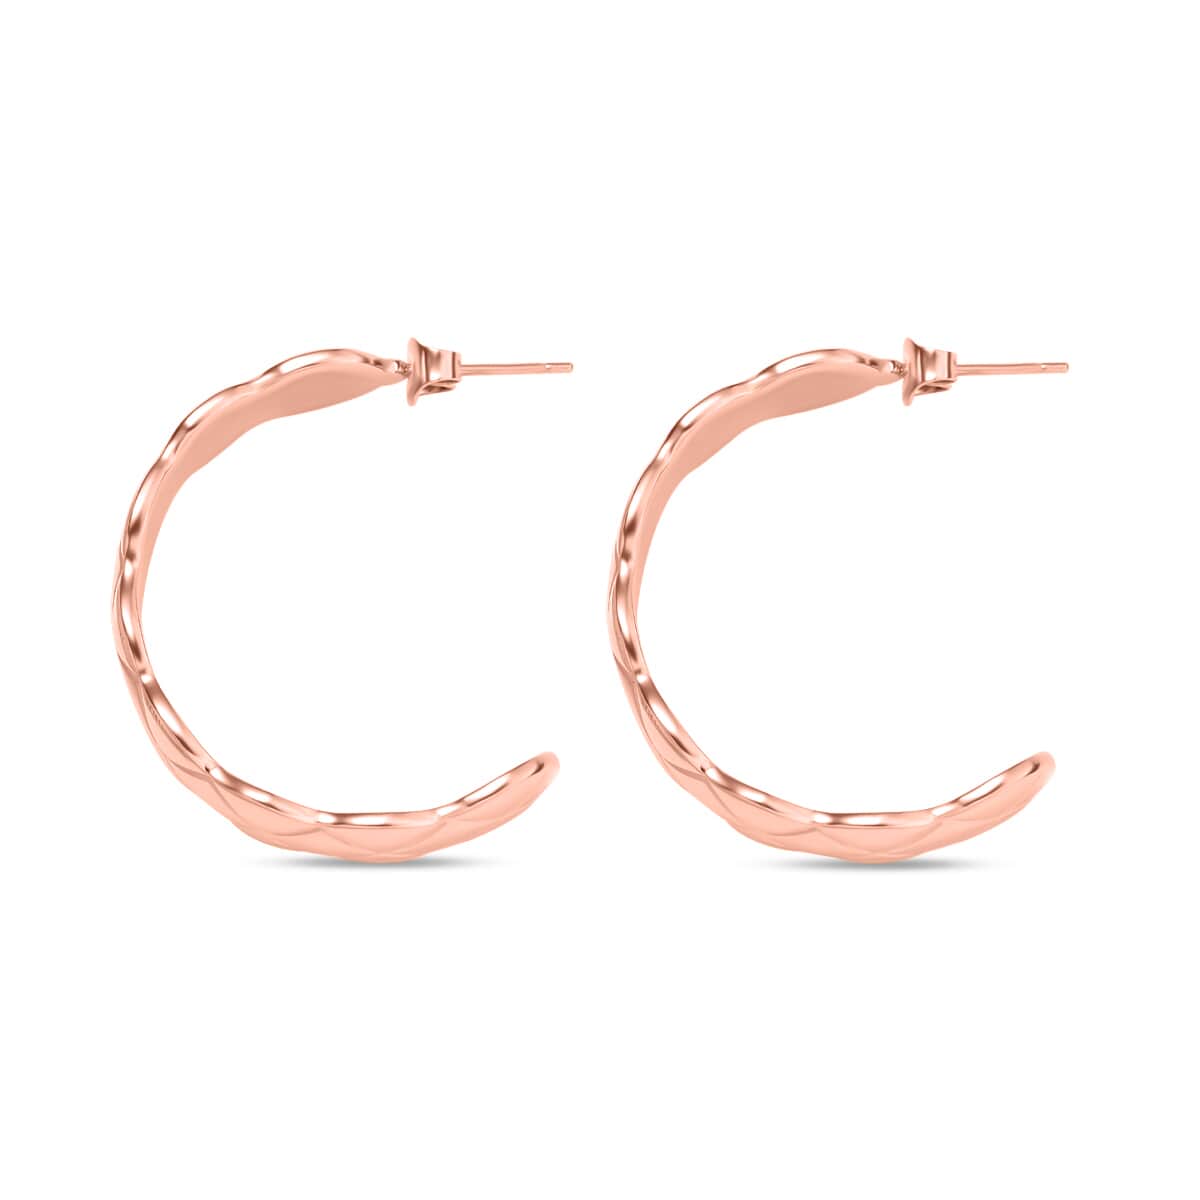 Ever True Diamond-cut Cuff Bracelet (7.0 In) and Half Hoop Earrings in ION Plated Rose Gold Stainless Steel, Jewelry Set, Birthday Gift For Her image number 7